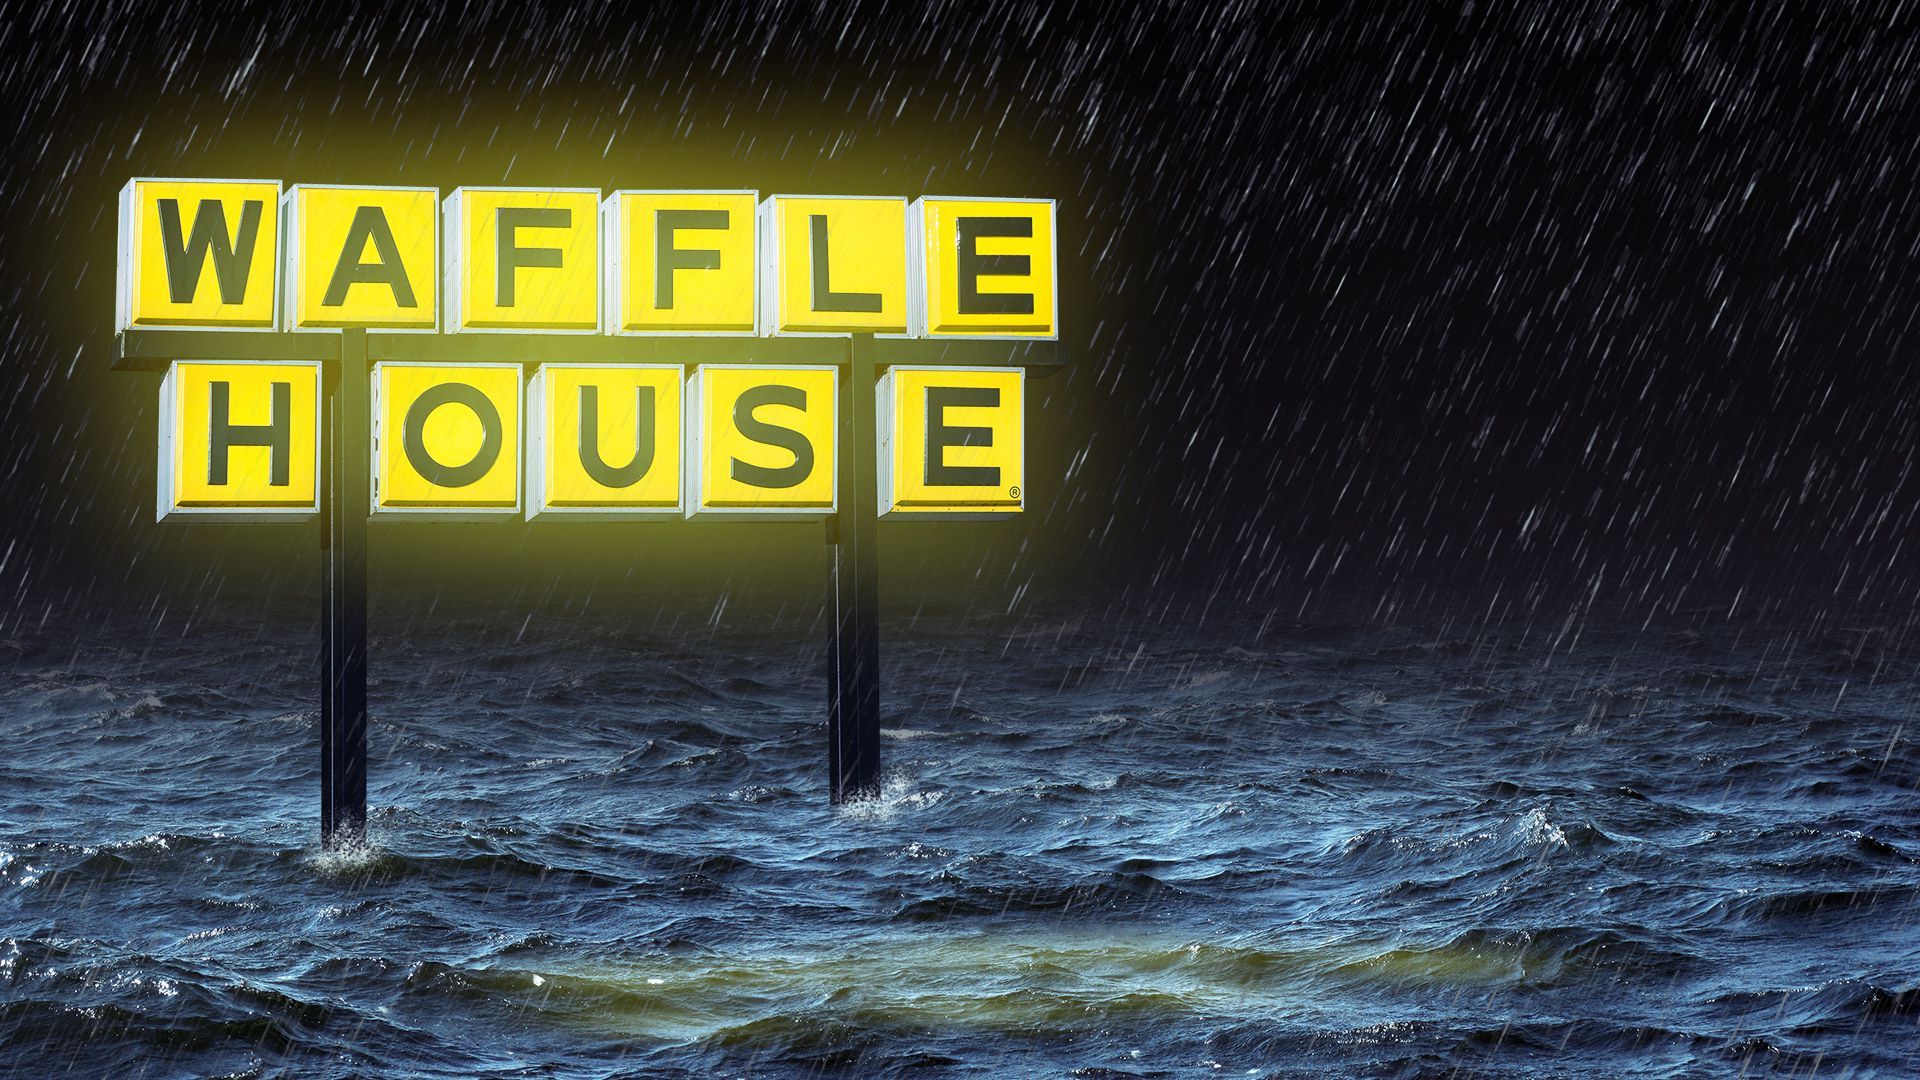 Illustration of a Waffle House sign above rising water in a storm, lit up and glowing. 